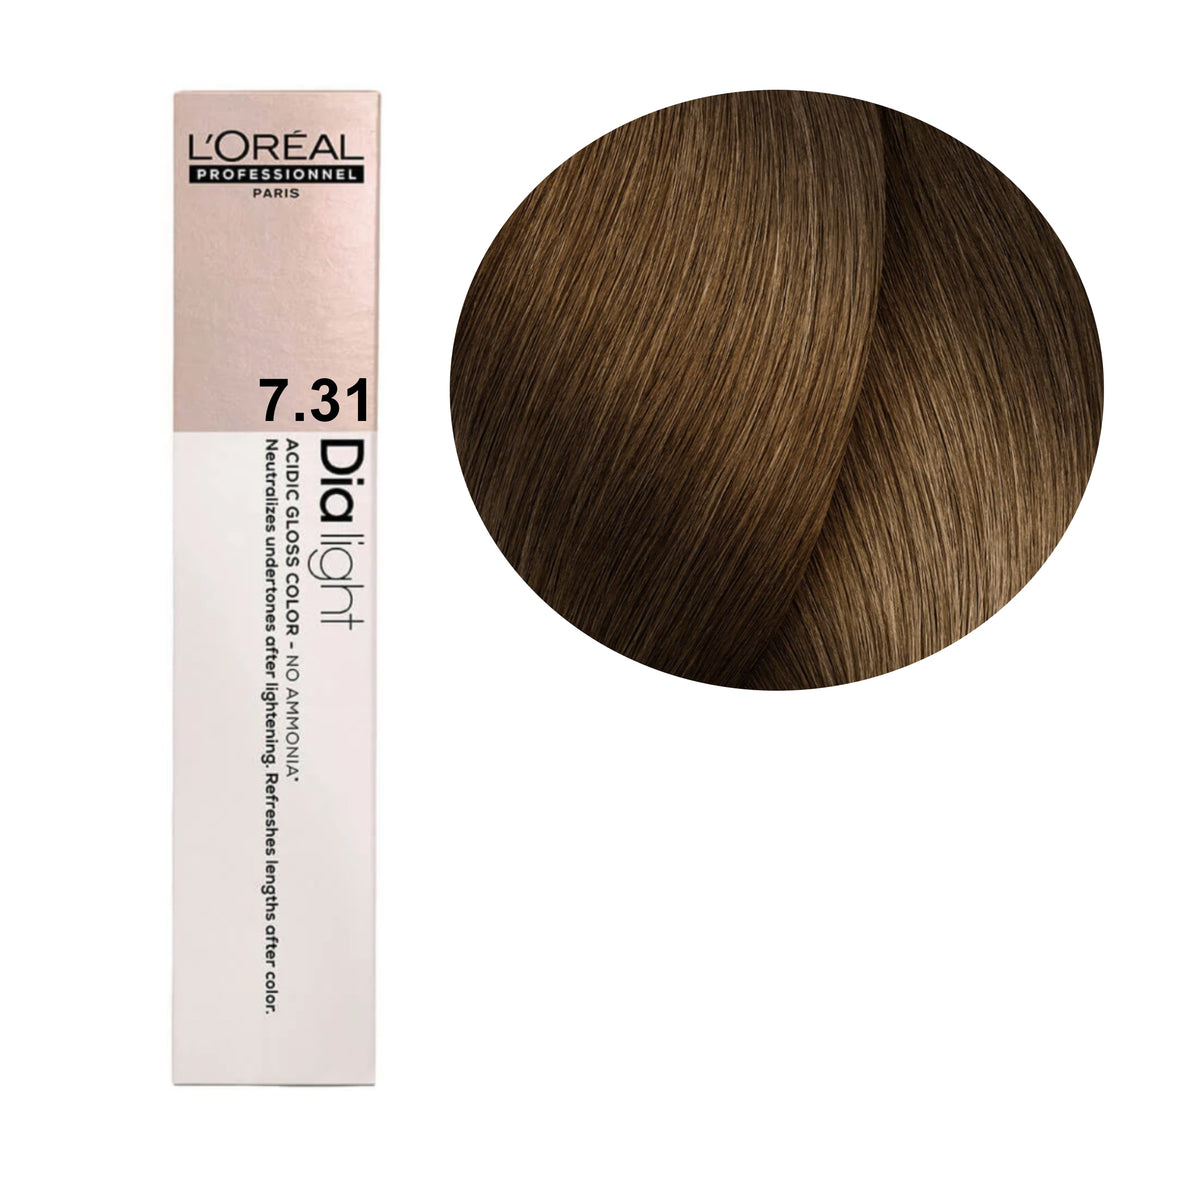 a box of loreal hair color in light brown